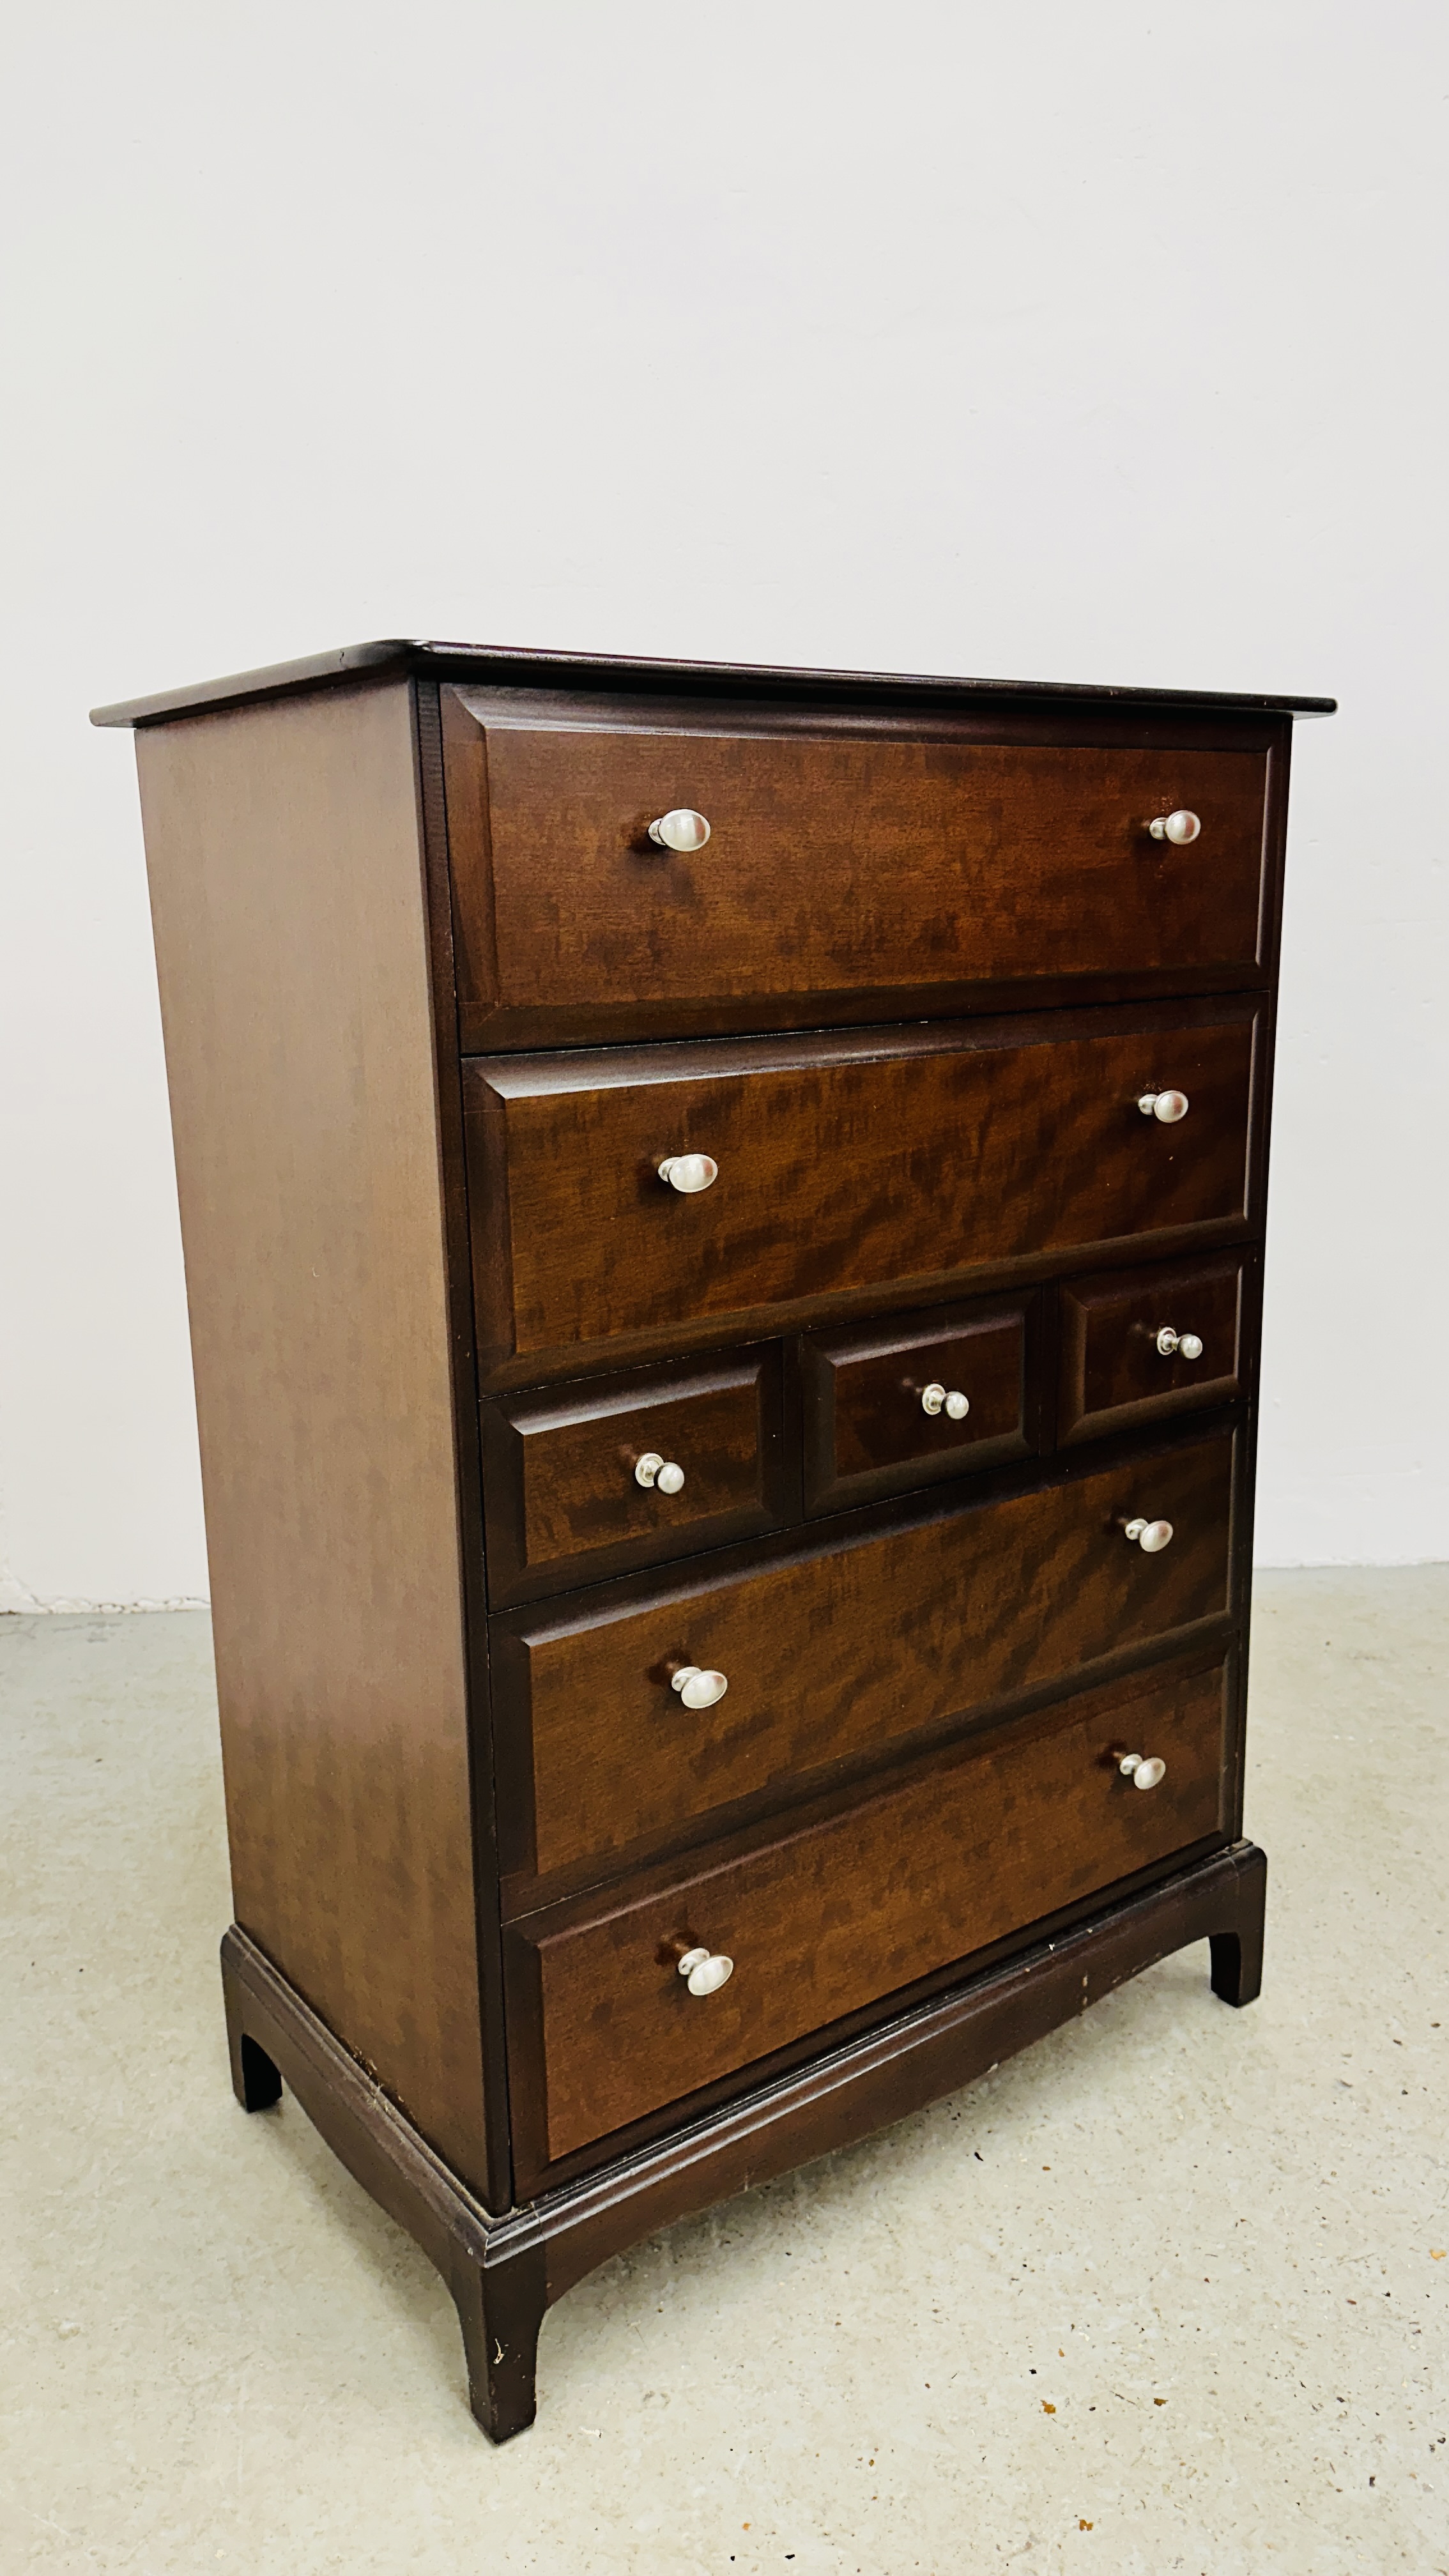 A STAG 7 MULTI DRAWER CHEST OF DRAWERS - W 82CM X D 46.5CM X H 110CM. - Image 7 of 7